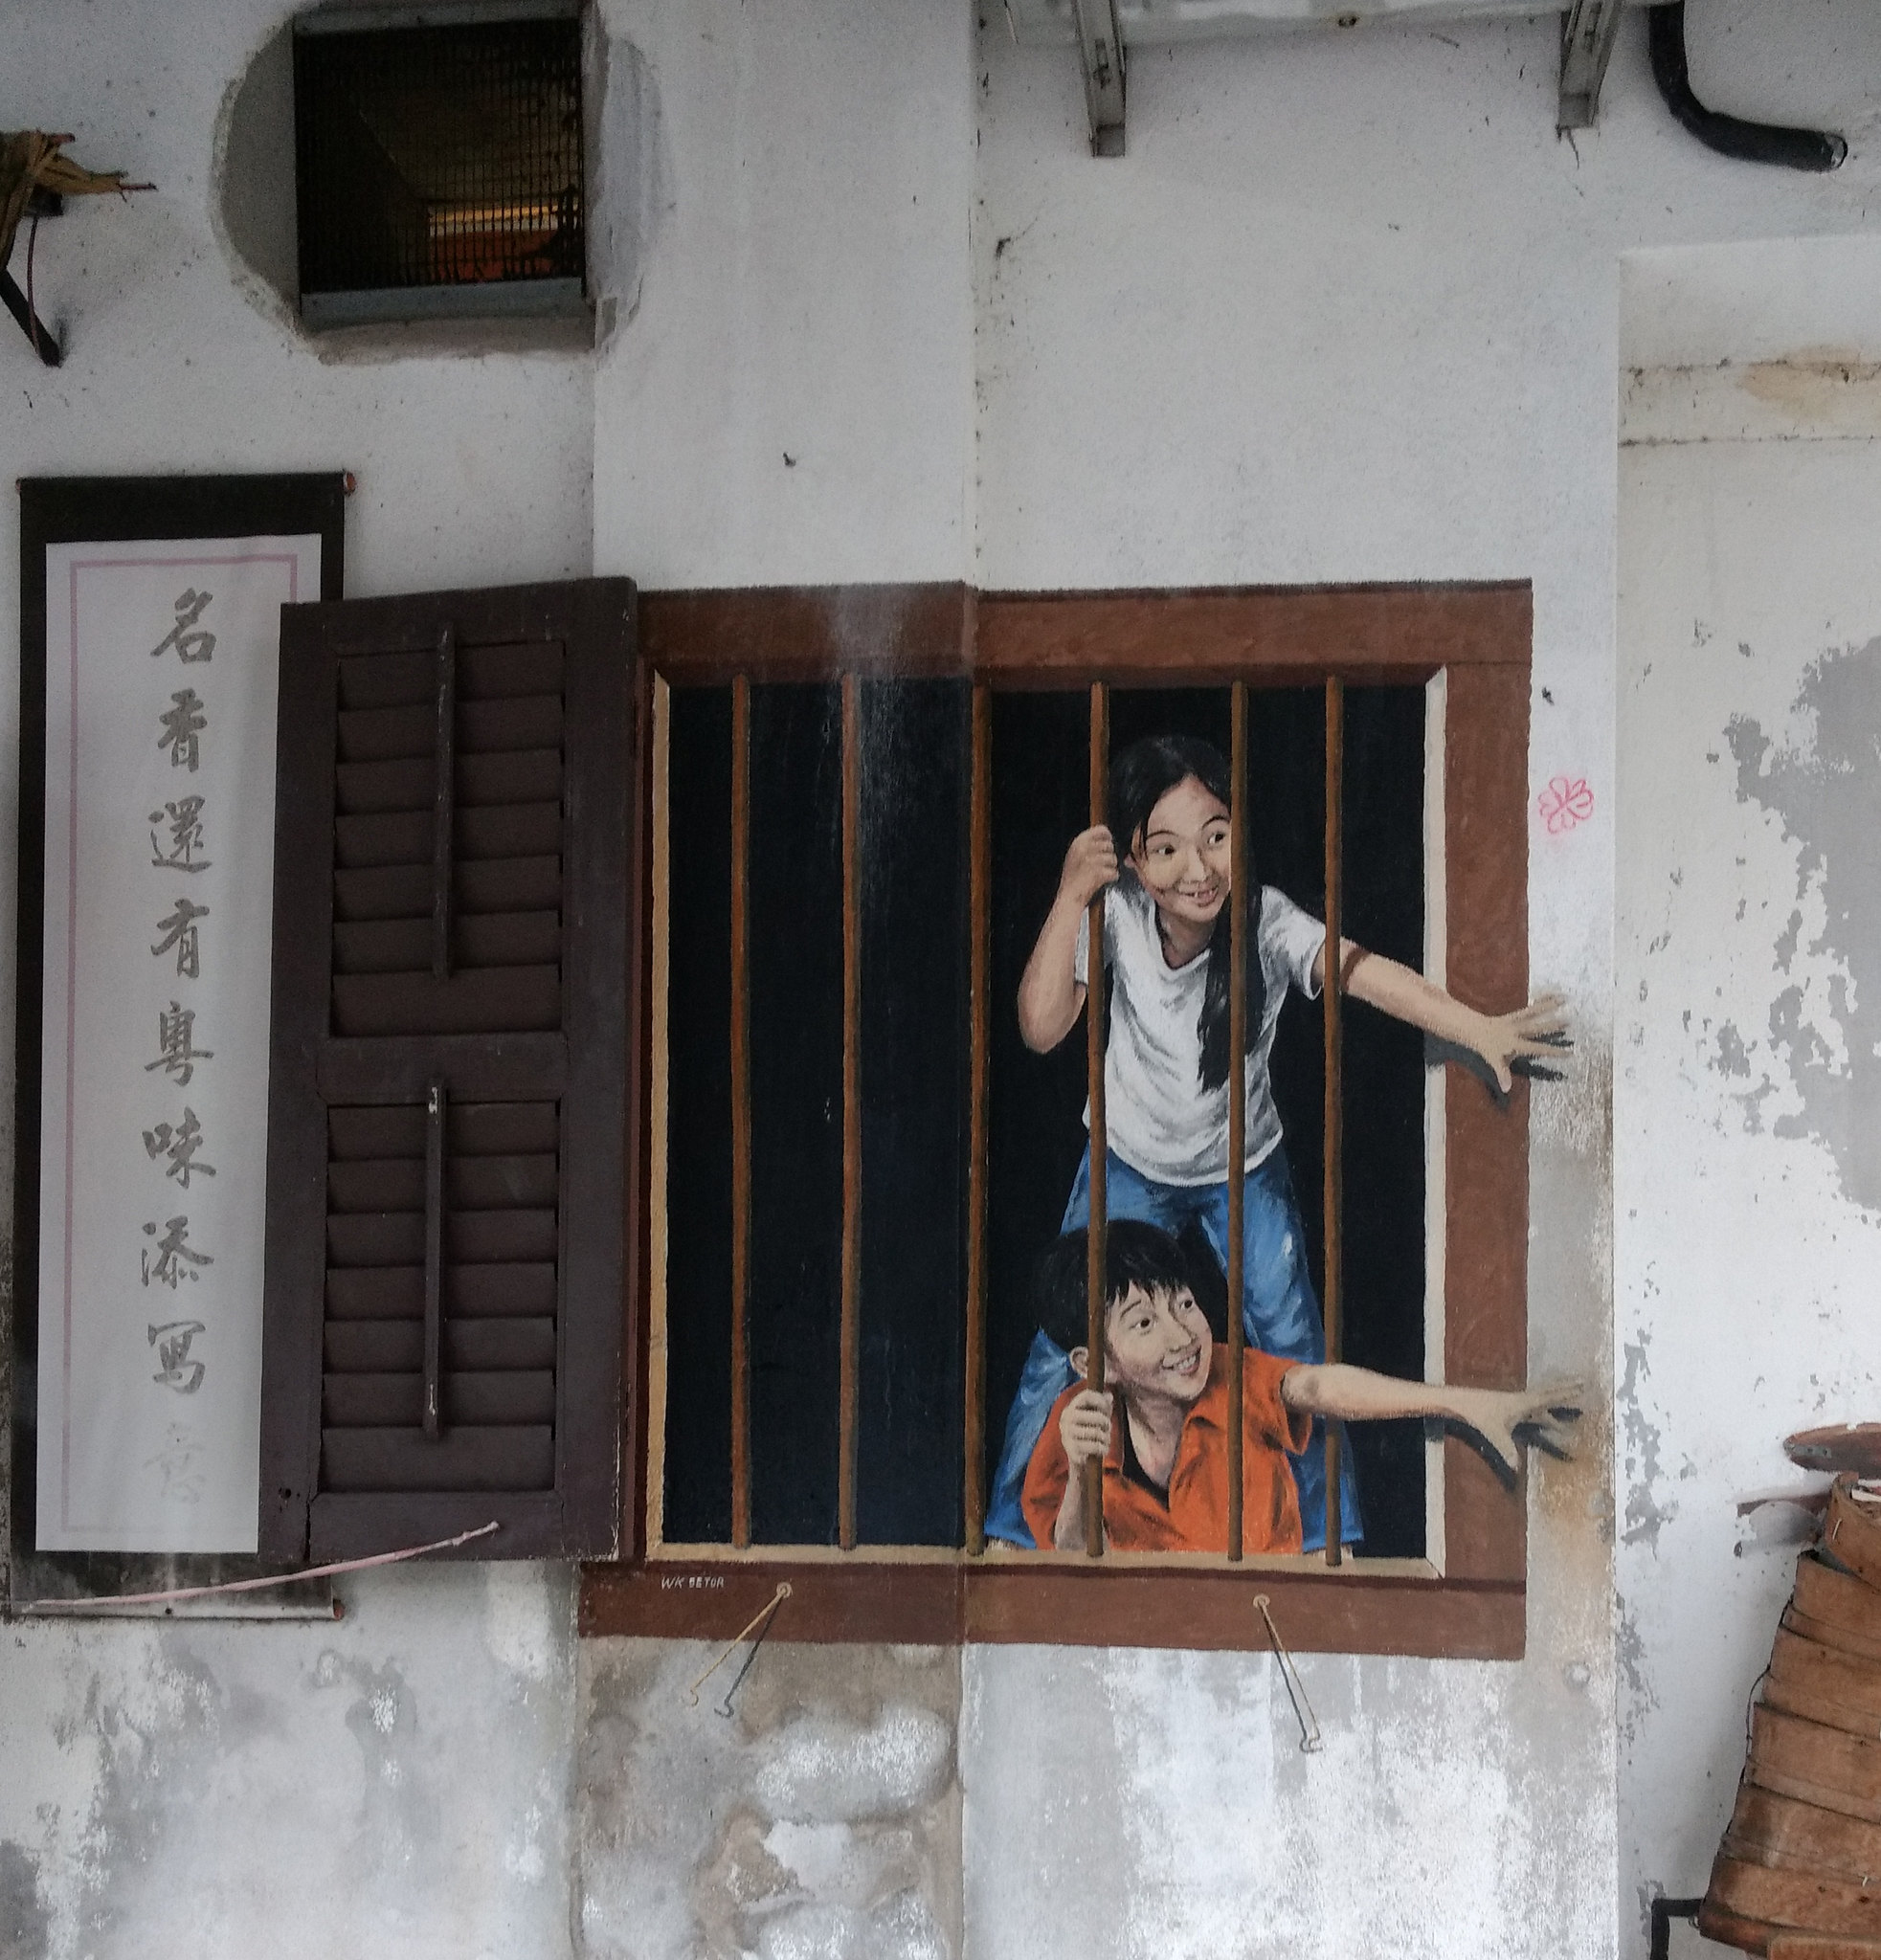 Children at the window, George Town, Penang